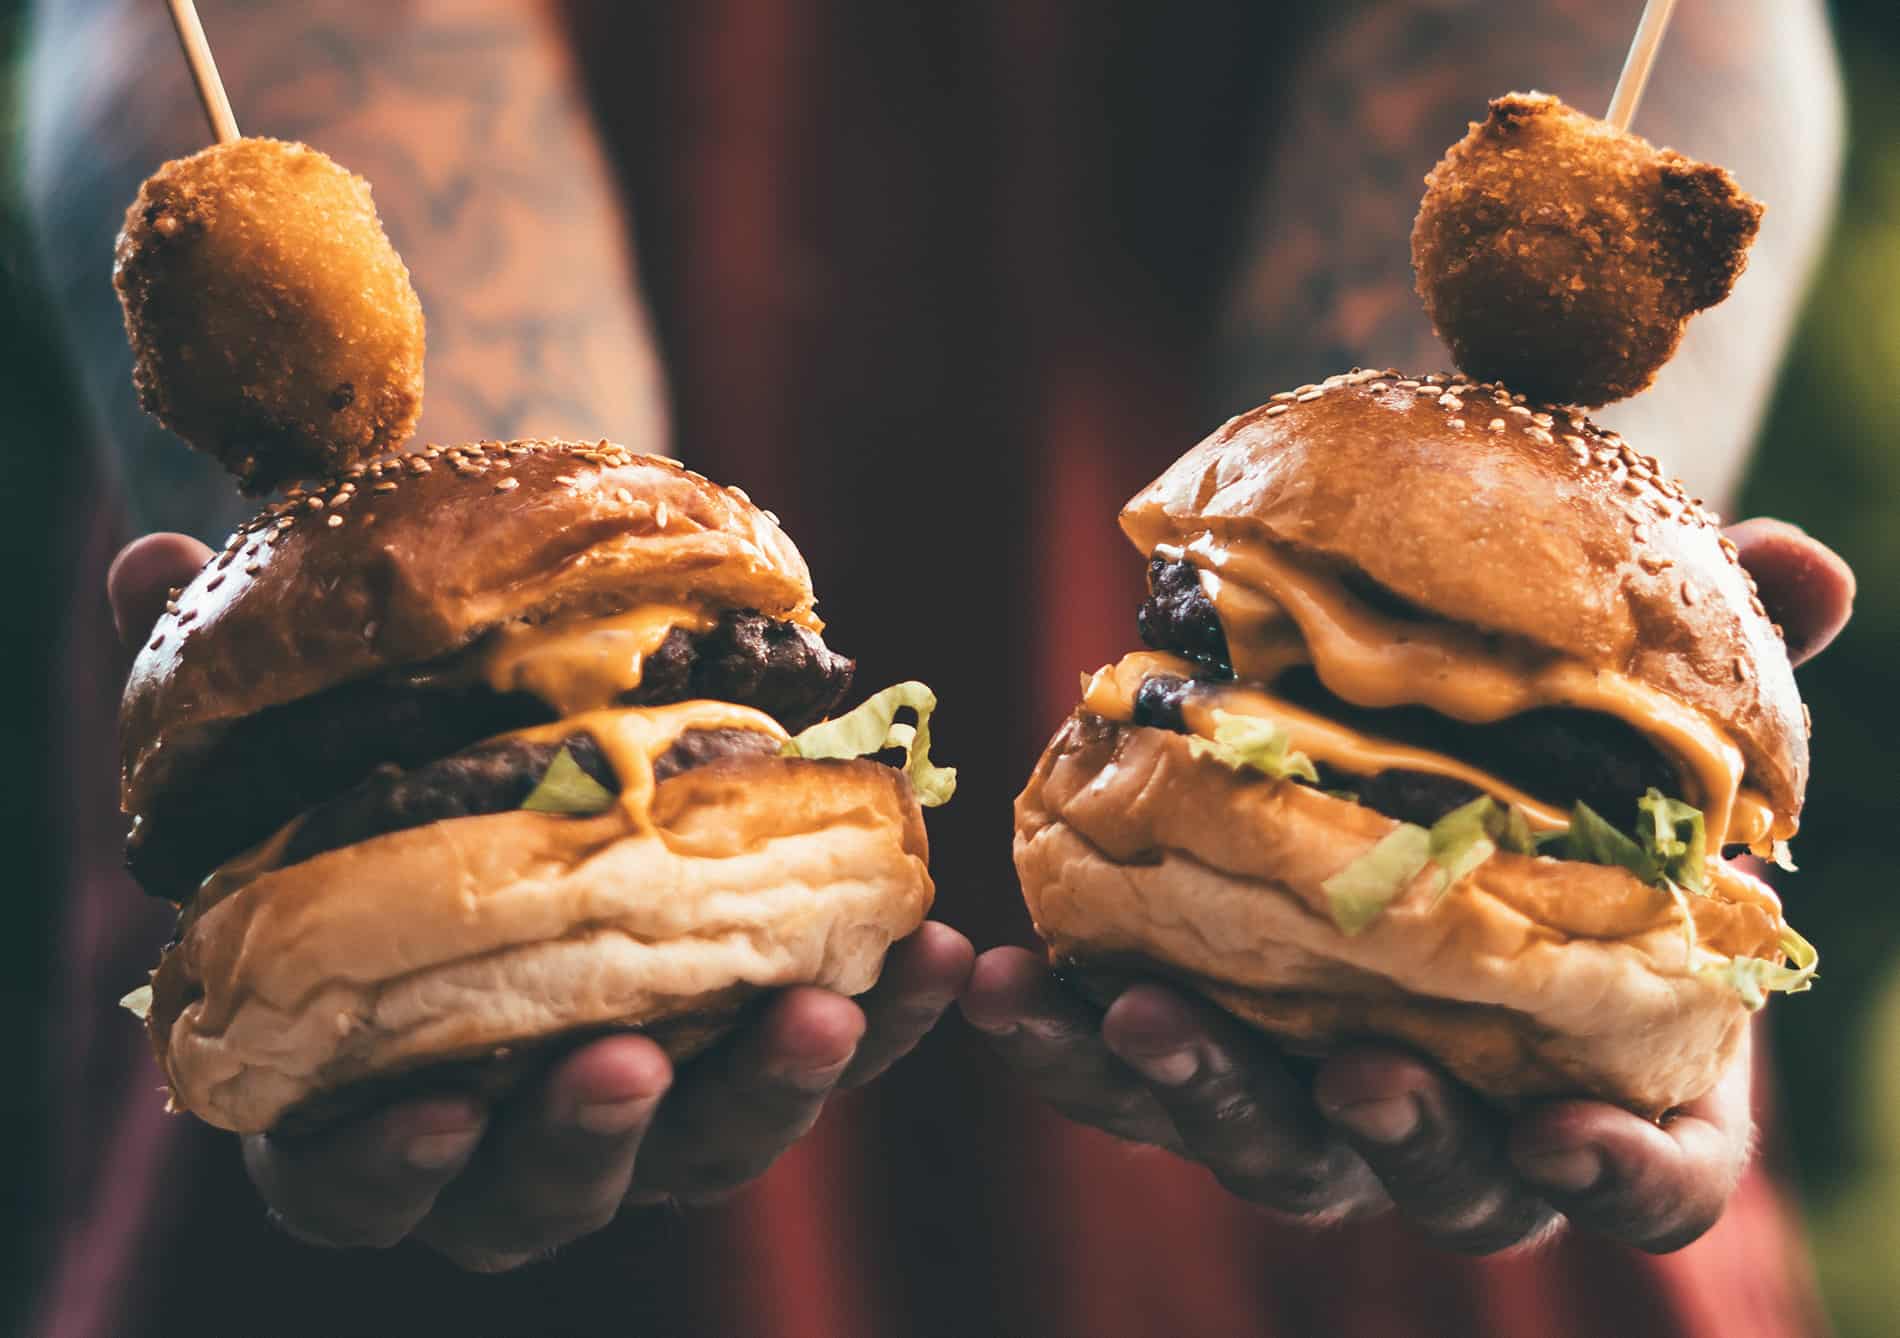 A guide to the finest burgers in London